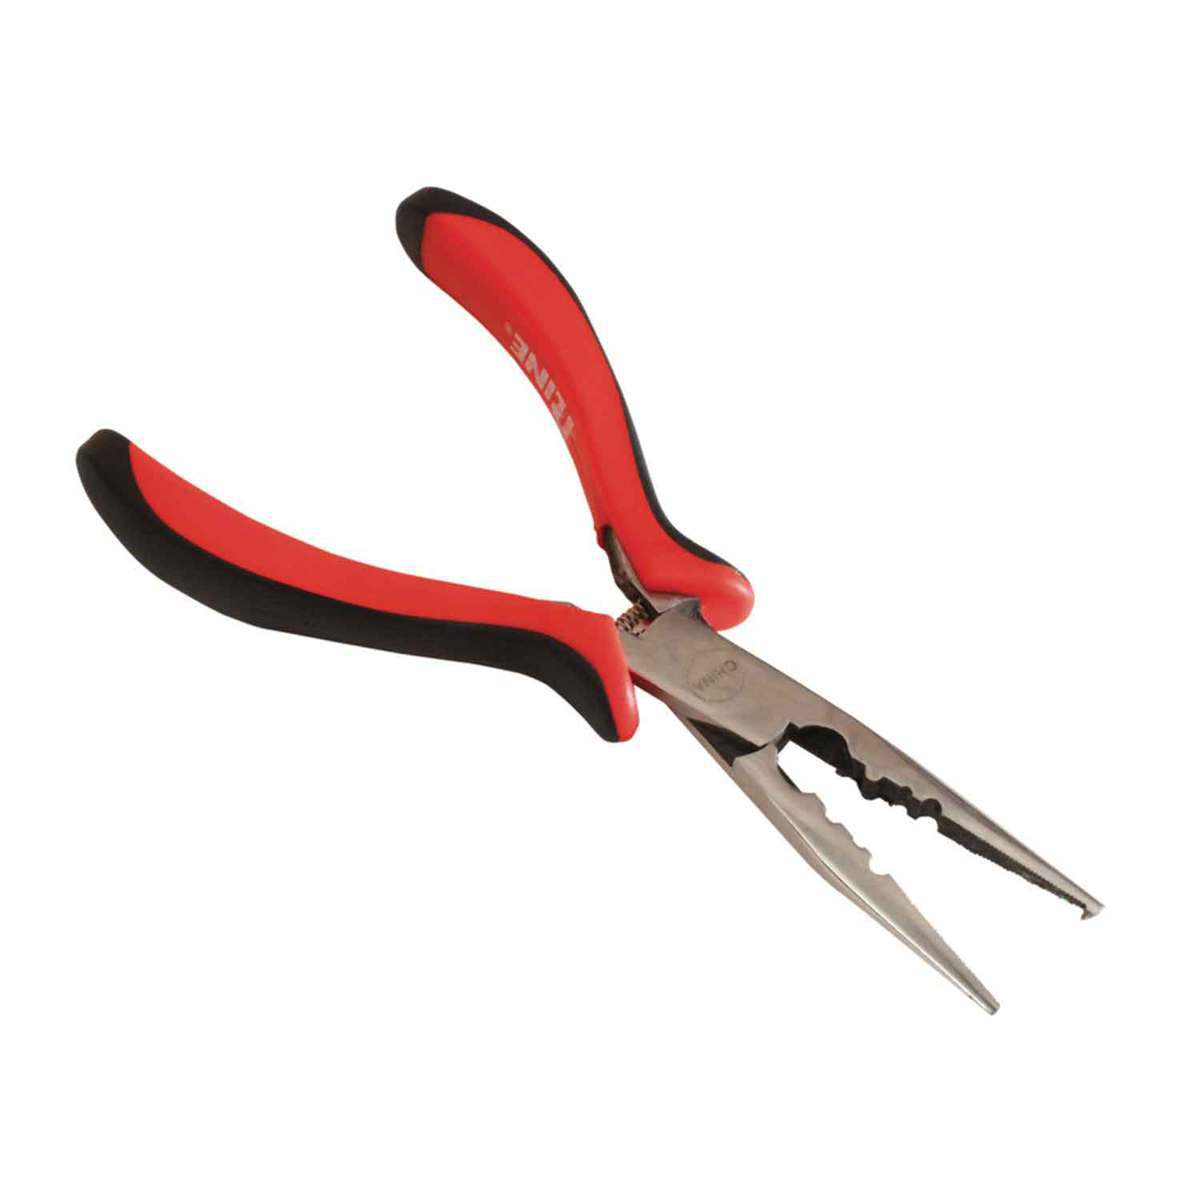 Booms Fishing X12 Aluminum Fishing Pliers Saltwater Split Ring Pliers for  Fishing Hook Removal, Comes with Sheath and Lanyard, Red - Coupon Codes,  Promo Codes, Daily Deals, Save Money Today